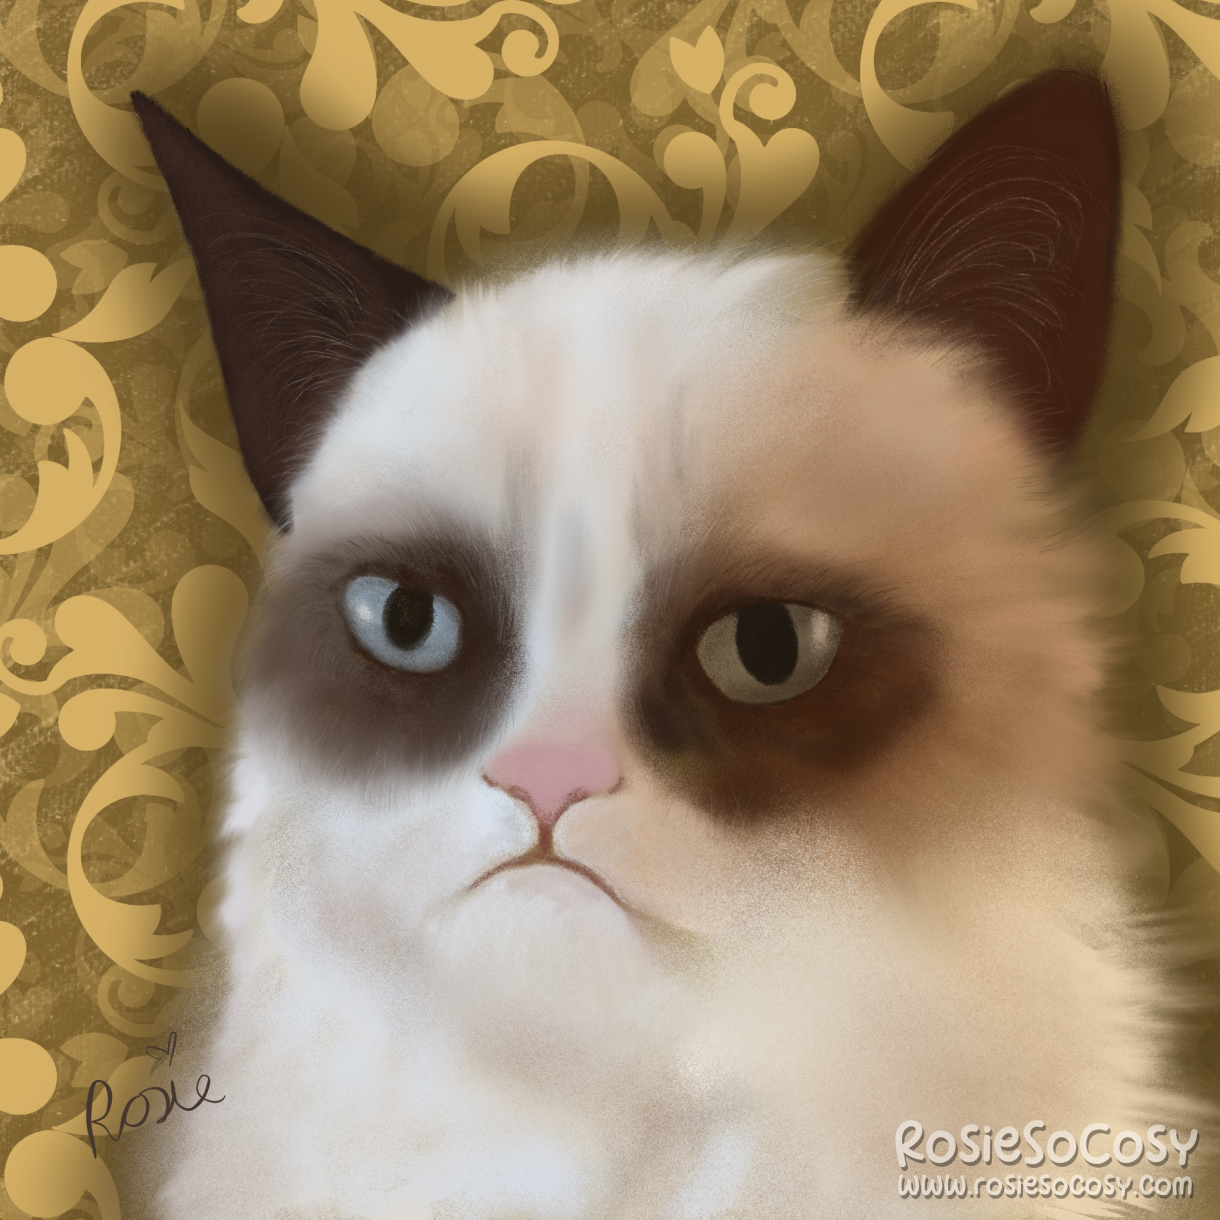 Digital drawing of Grumpy Cat. It's a cream coloured cat with dark brown ears and dark circles around her eyes. She looks a bit like a ragdoll. As per usual, Grumpy Cat is looking rather annoyed, a bit sulky. The background is a golden yellow with a swirly pattern.